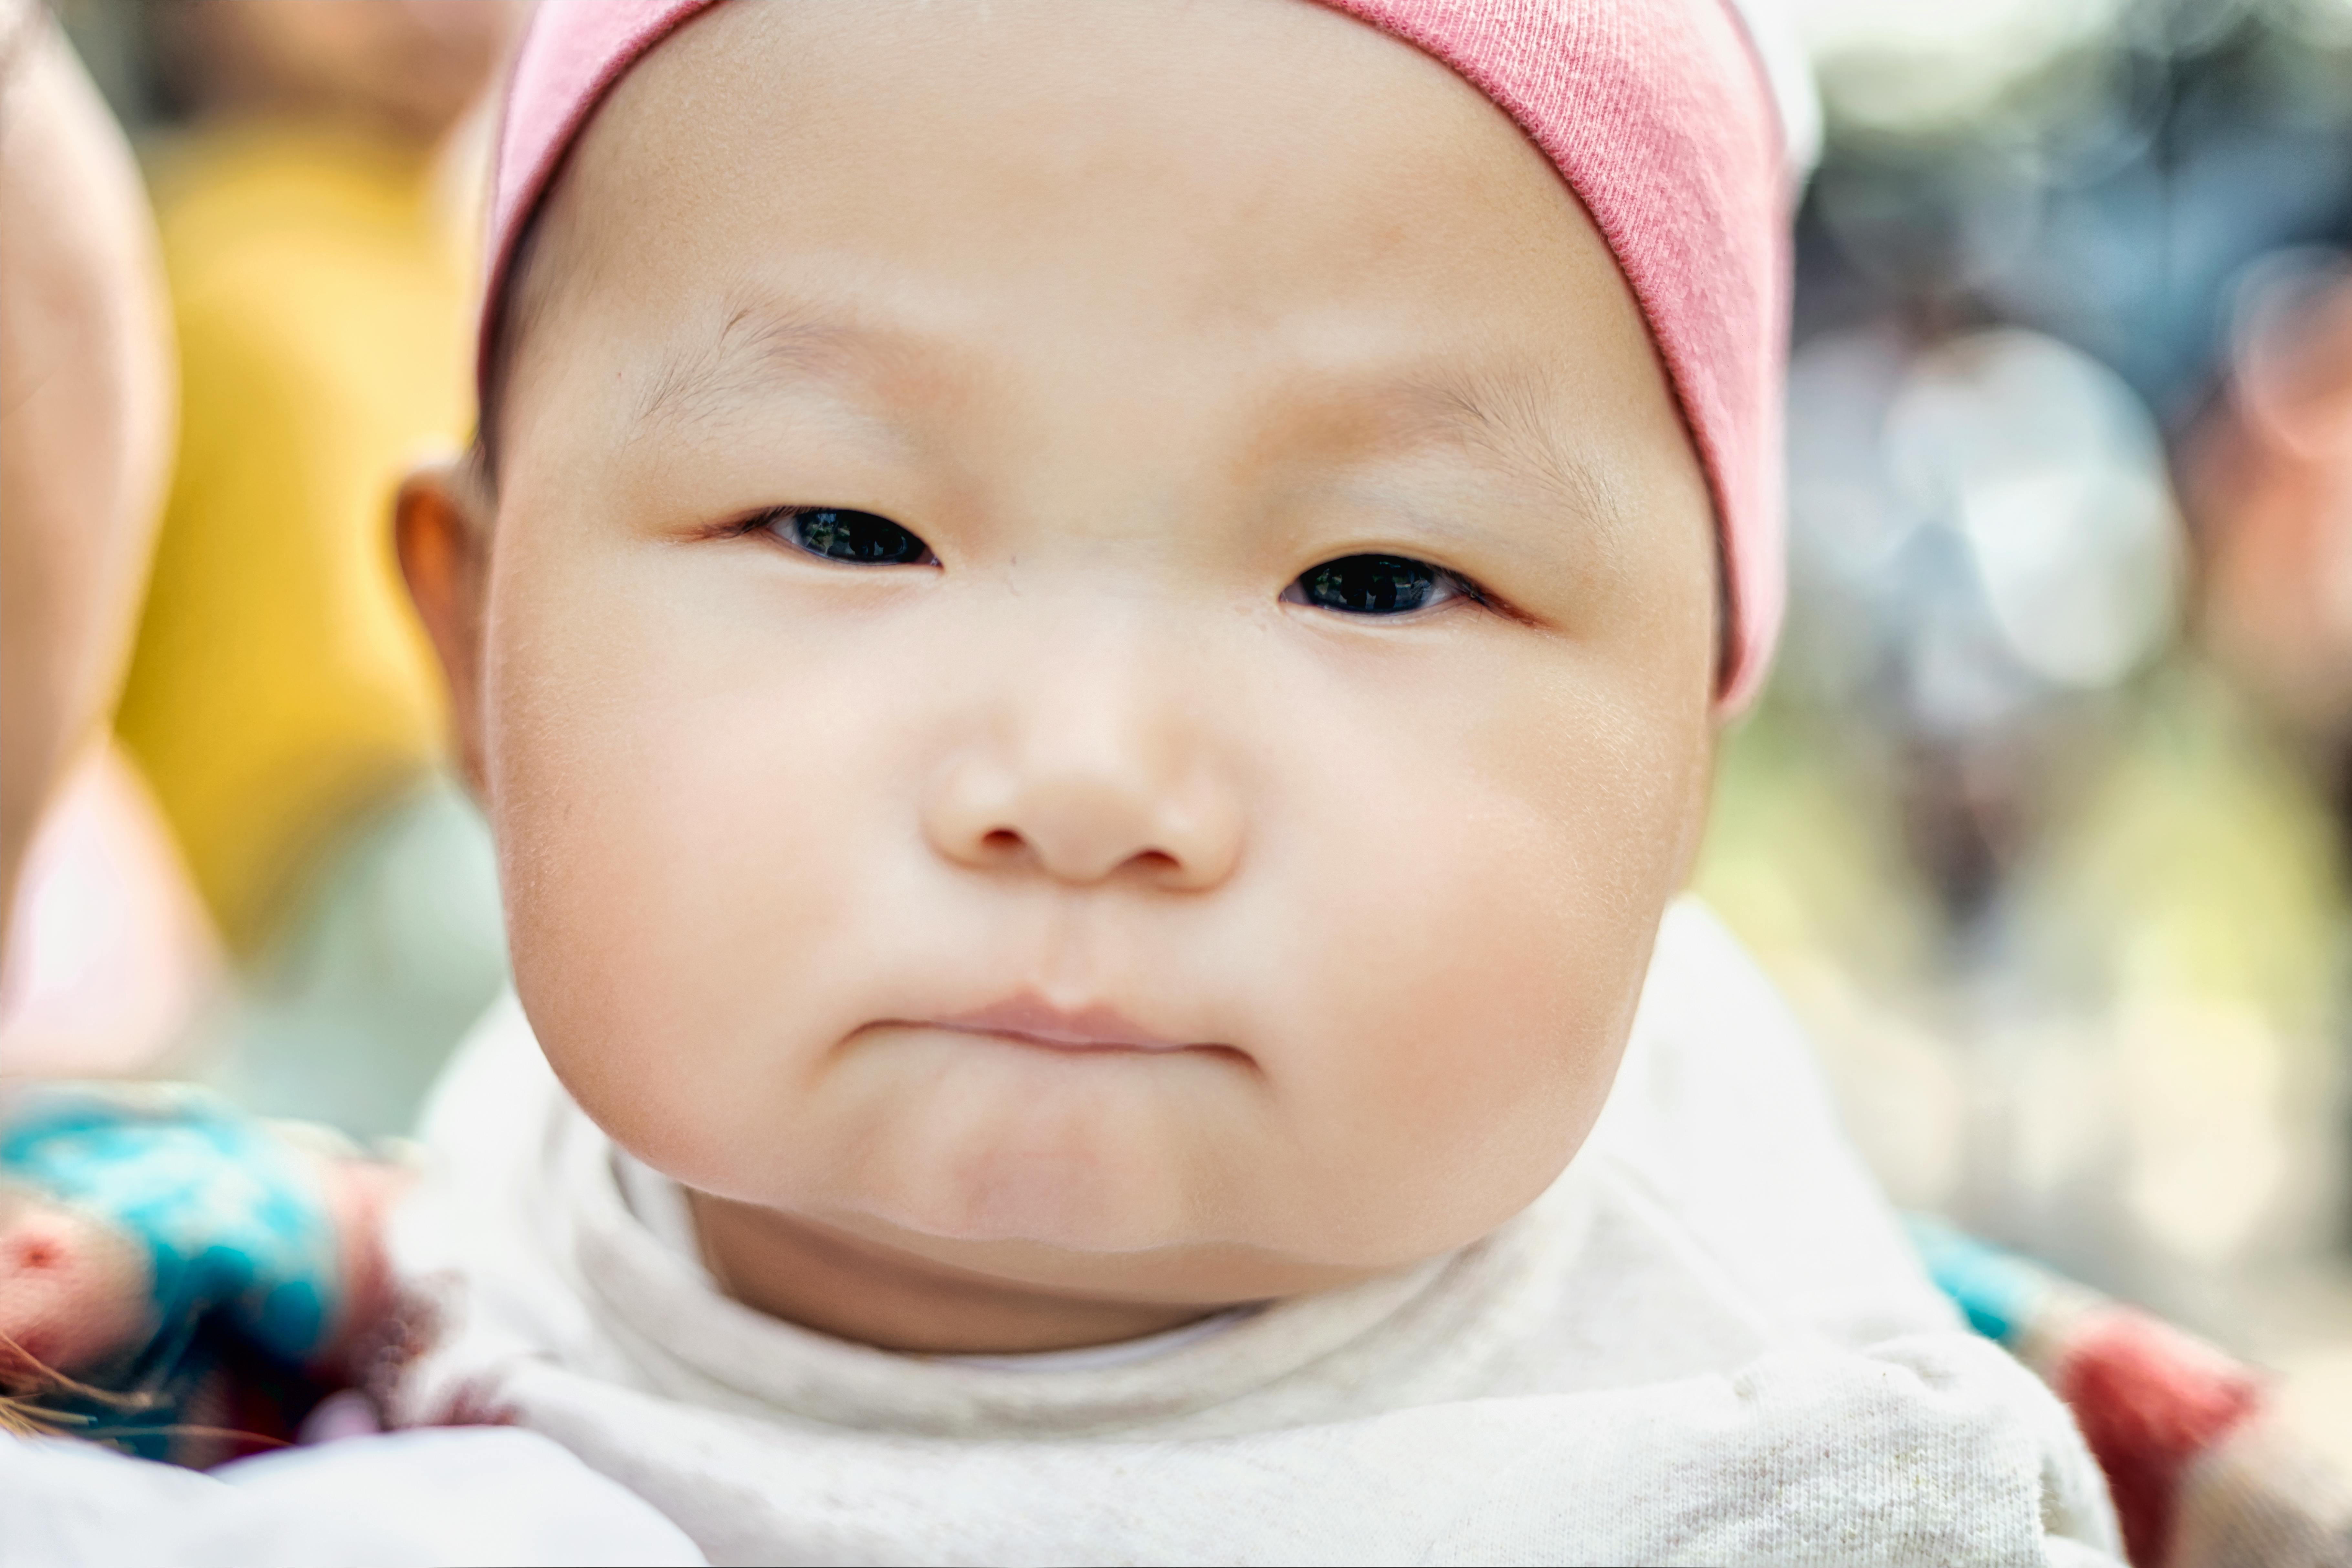 Close-up photo of a baby | Source: Pexels